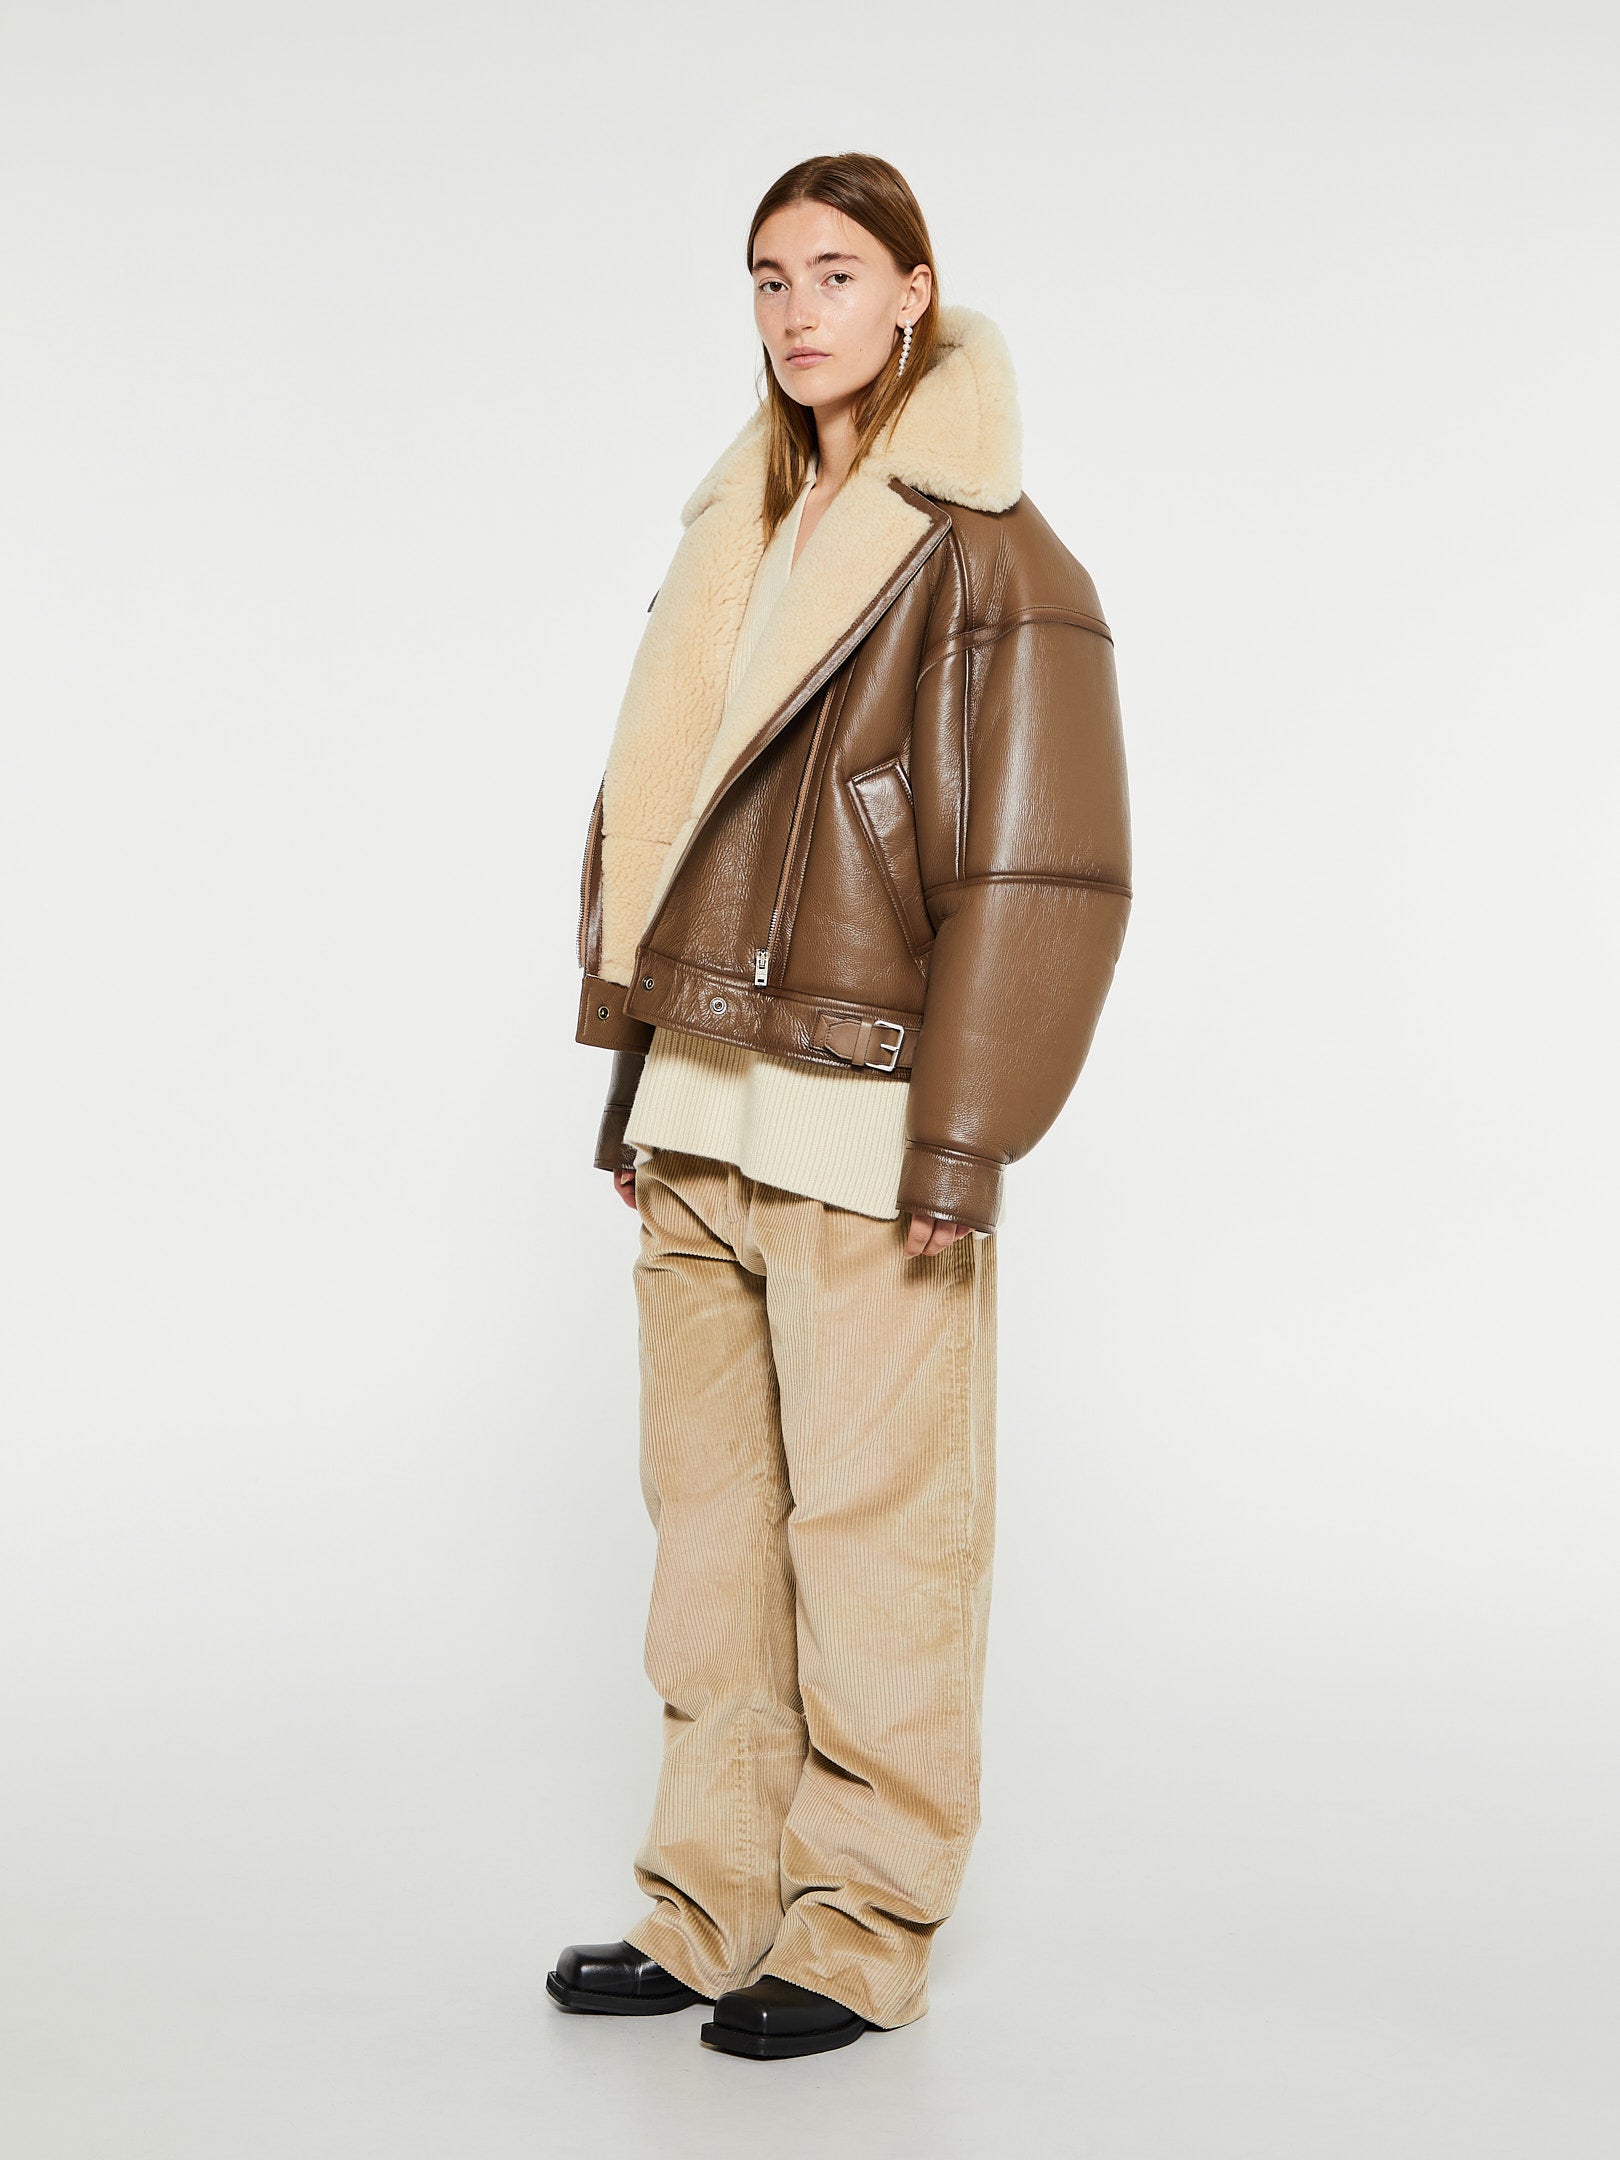 Shearling Jacket in Brown and Light Camel